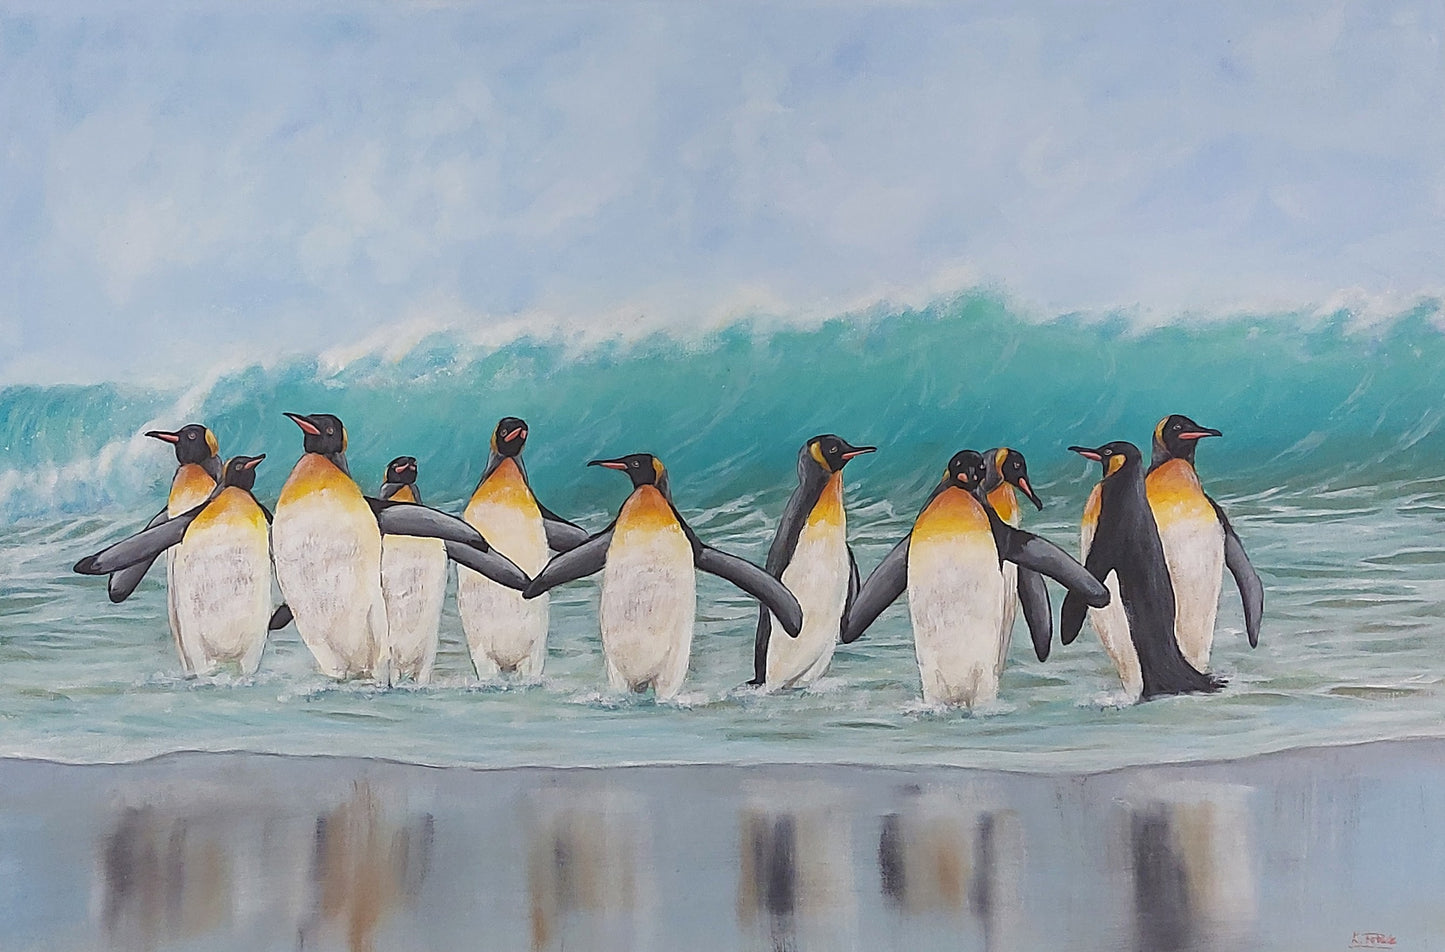 Shore Waddle is an acrylic painting by Katherine Polack. The painting is of a large group of penguins on the seashore watching their reflections as a bright turquoise wave forms behind them against the gloomy grey sky. The painting is 20 x 30" acrylic on canvas.